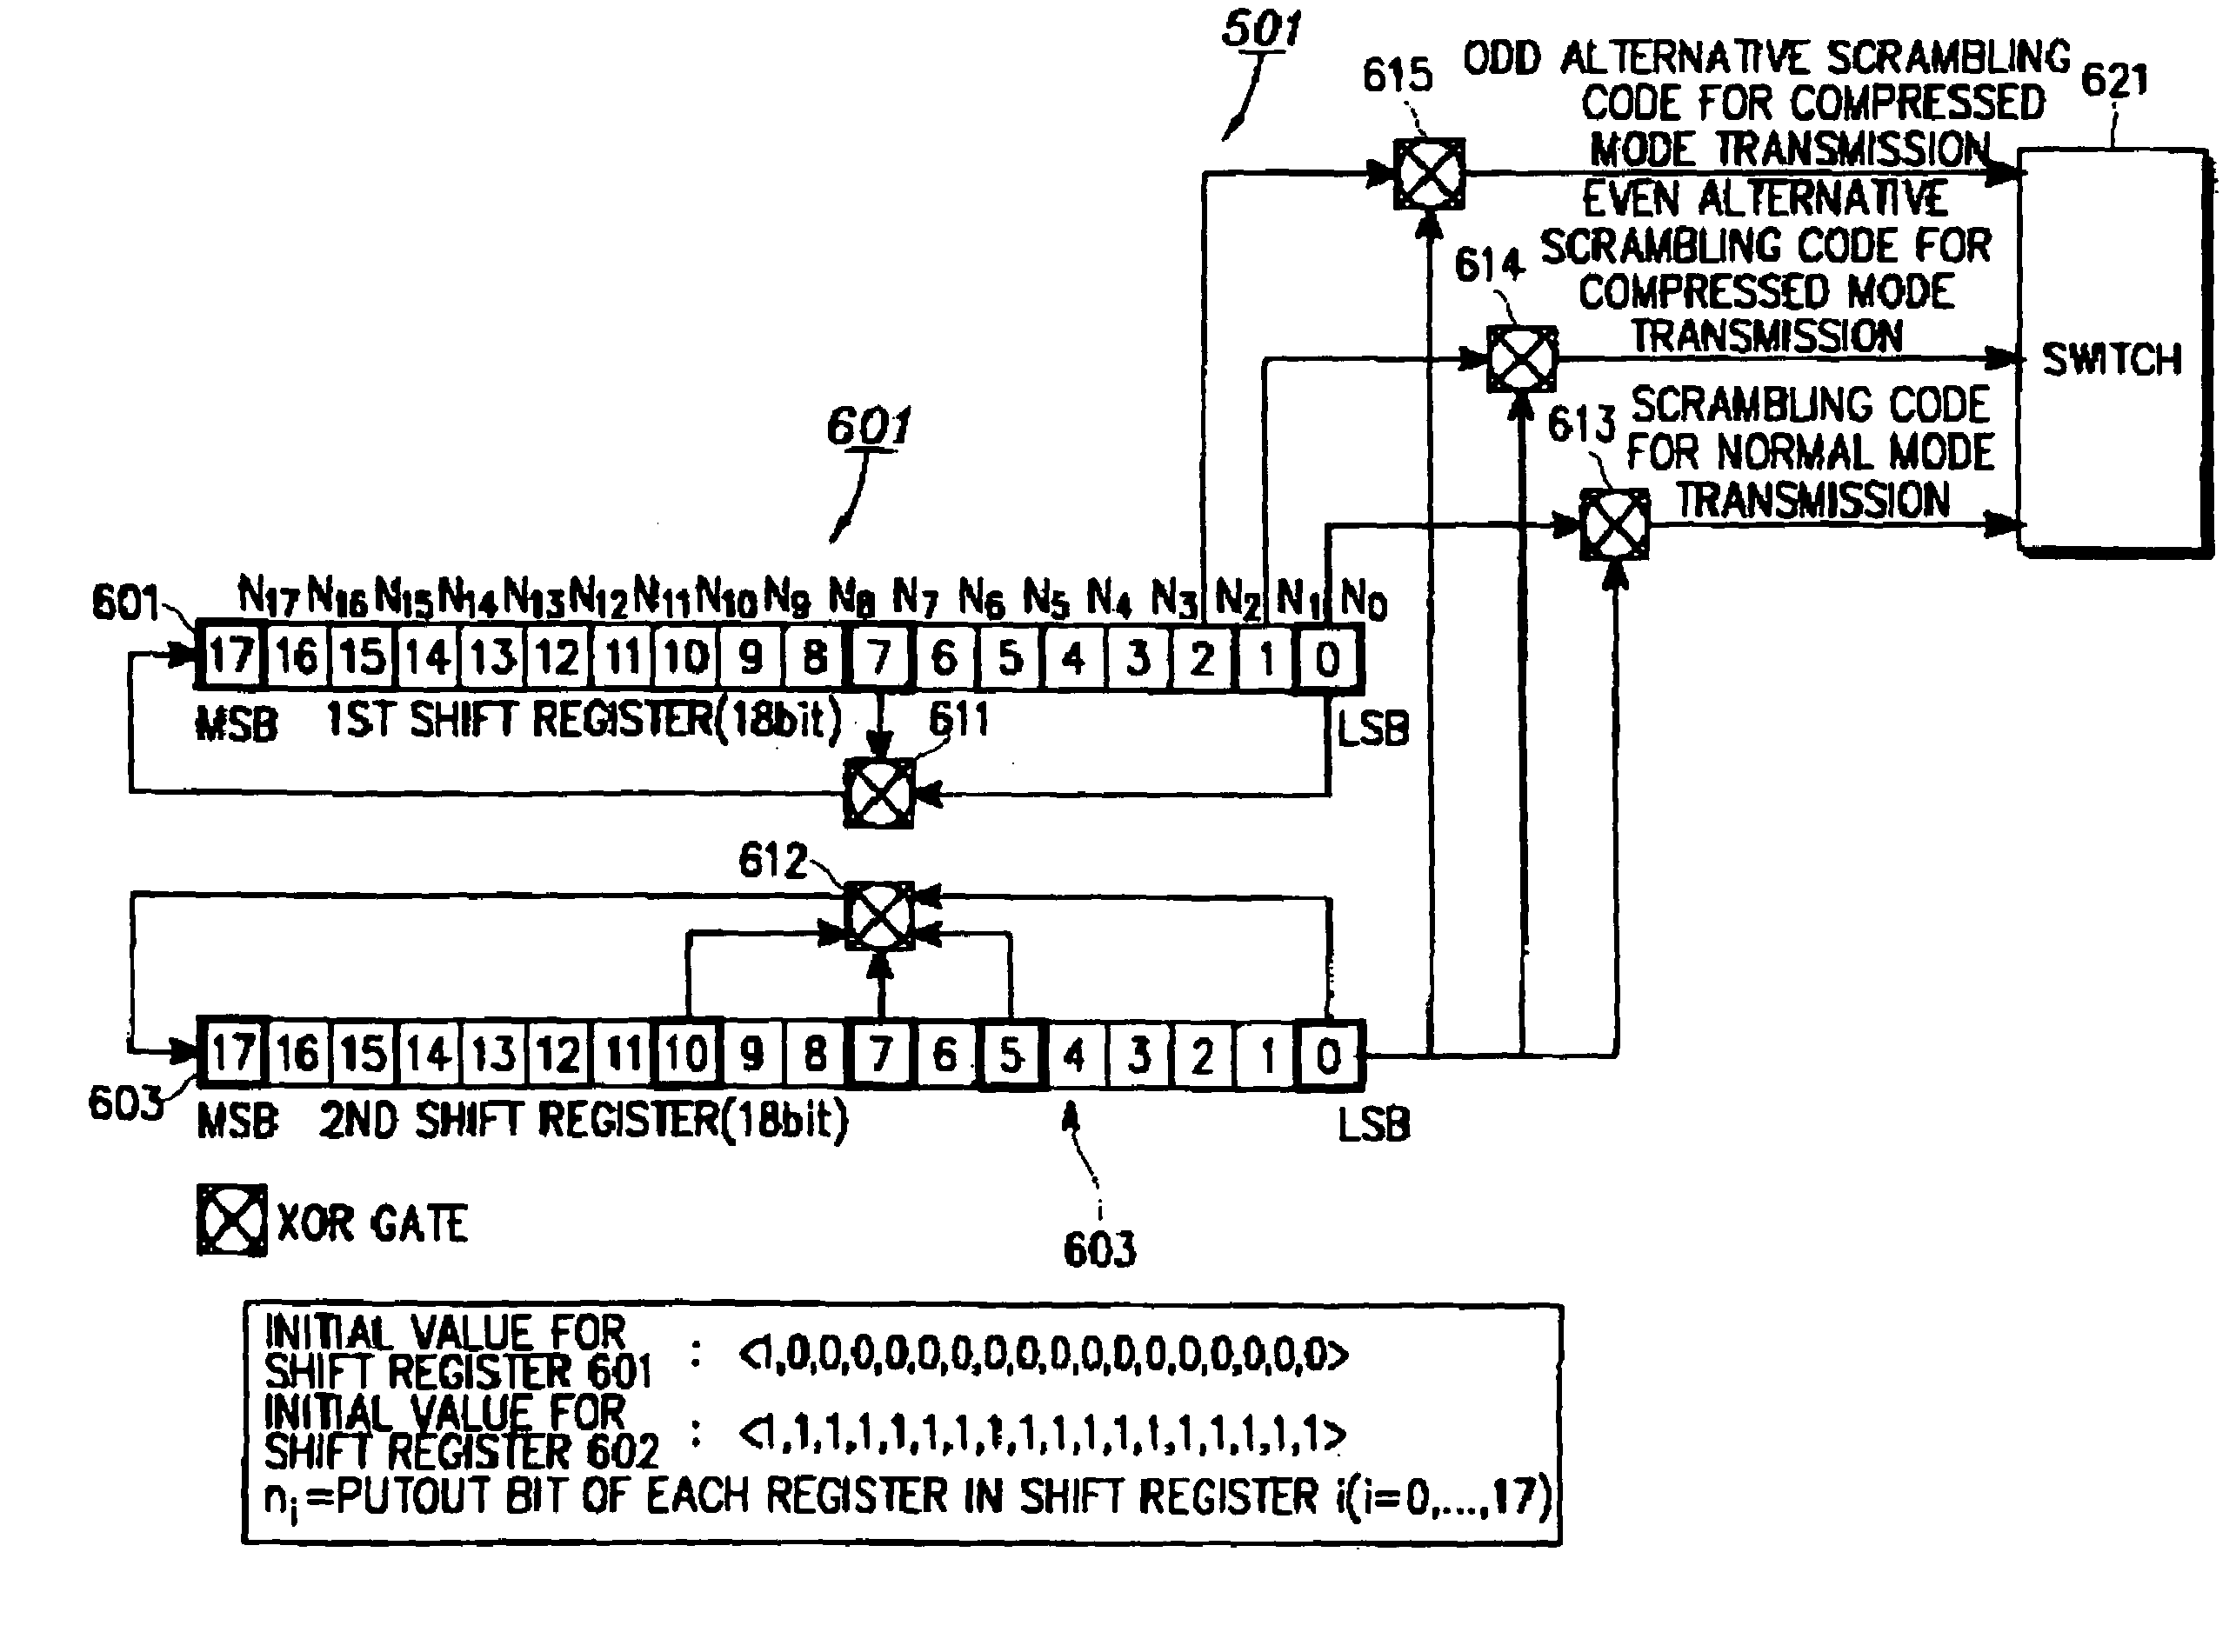 Apparatus and method for generating multiple scrambling codes in asynchronous mobile communication system